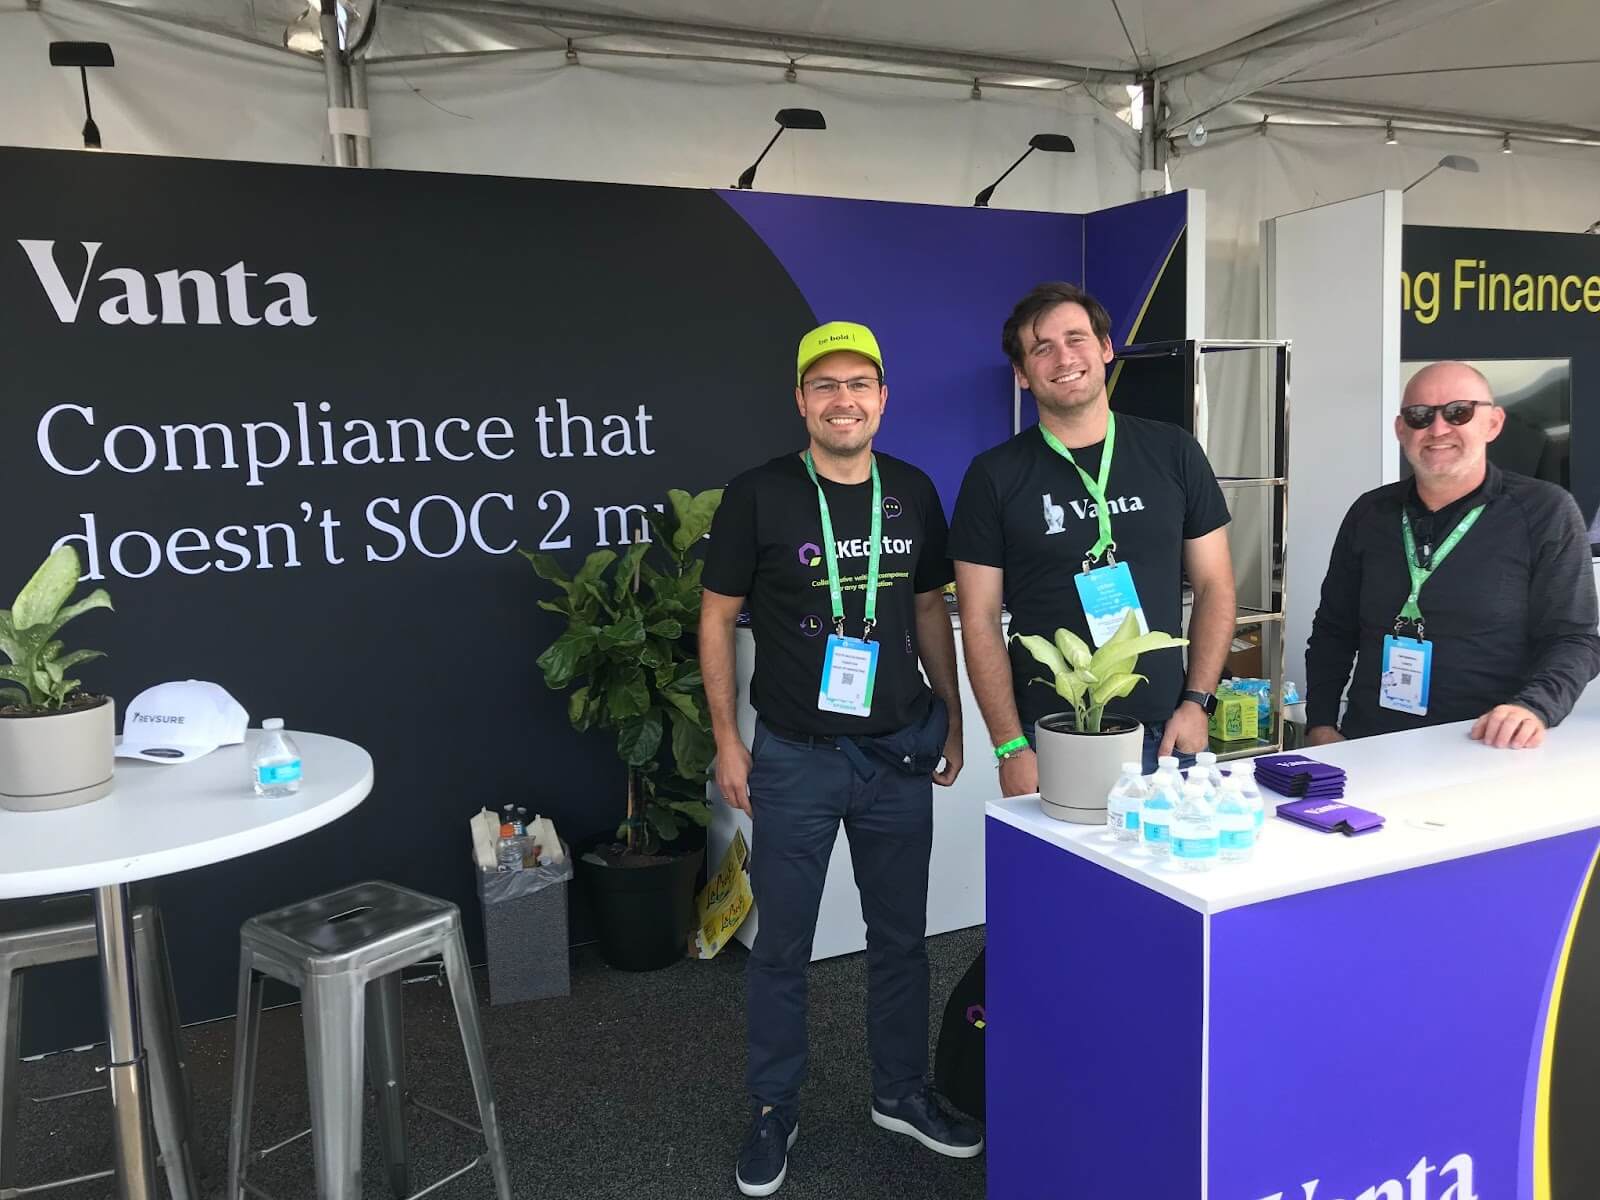 Piotr stopped by Vanta’s booth at SaaStr Annual 2022 and had a friendly chat.